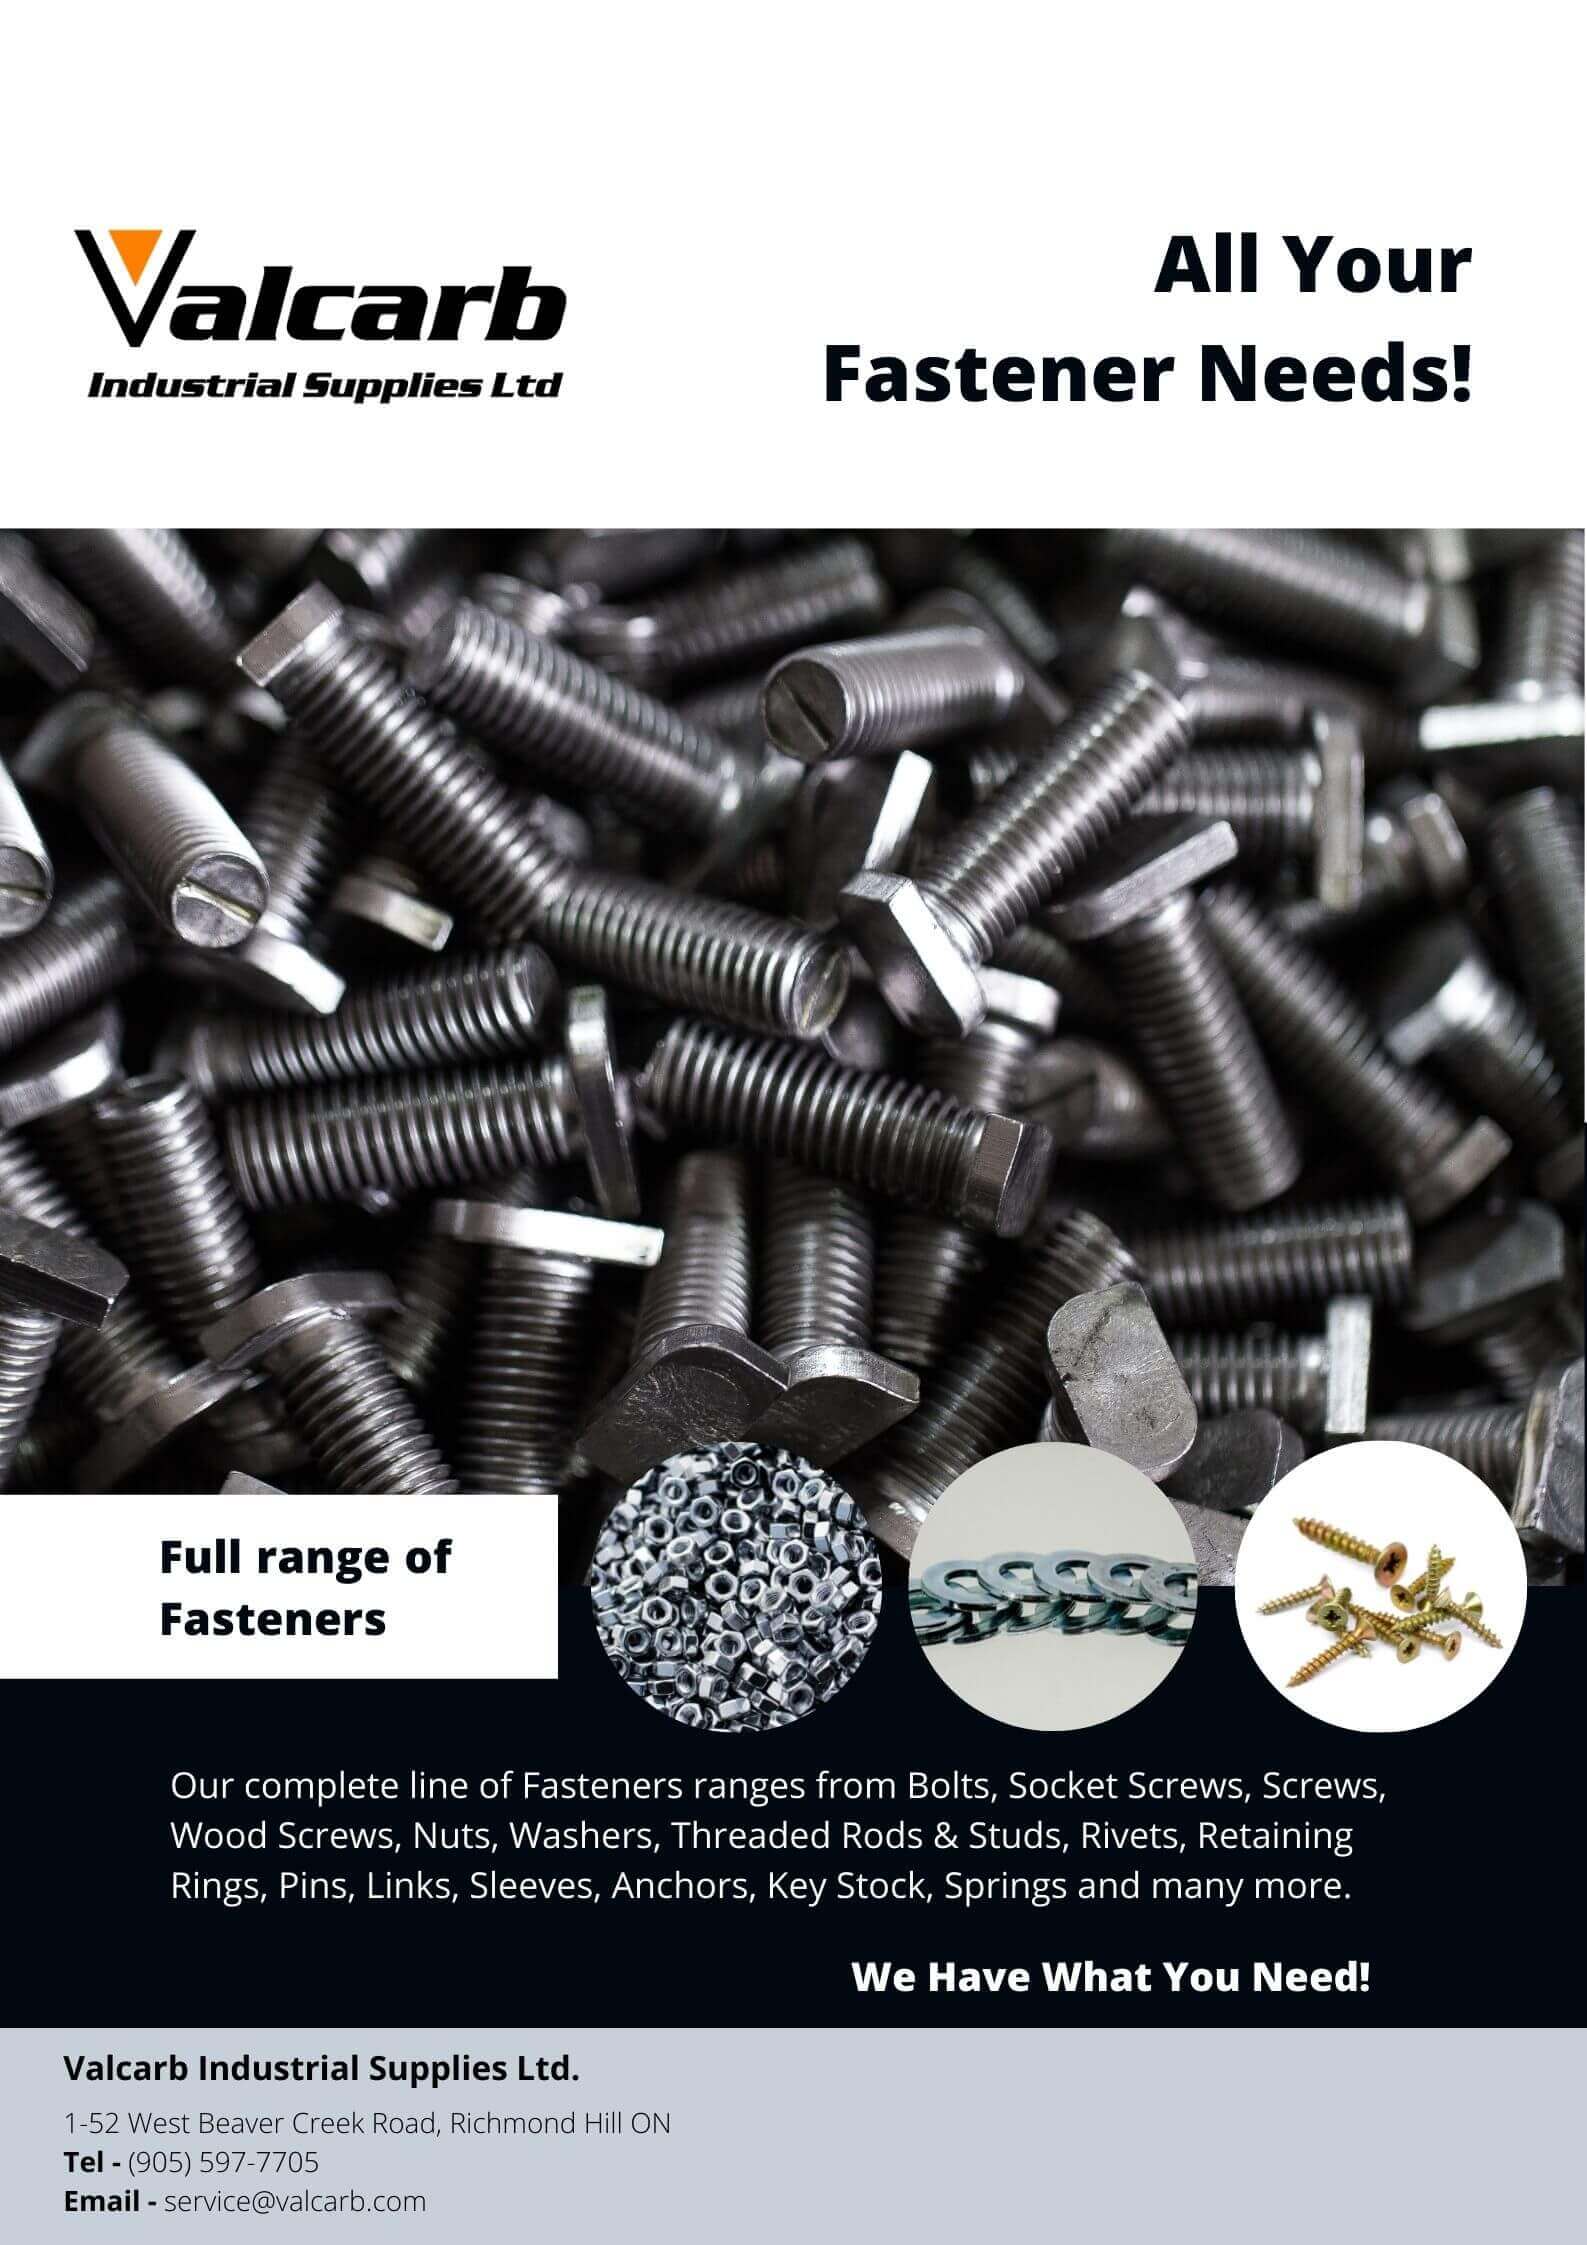 We Can Supply All your Fastener Needs